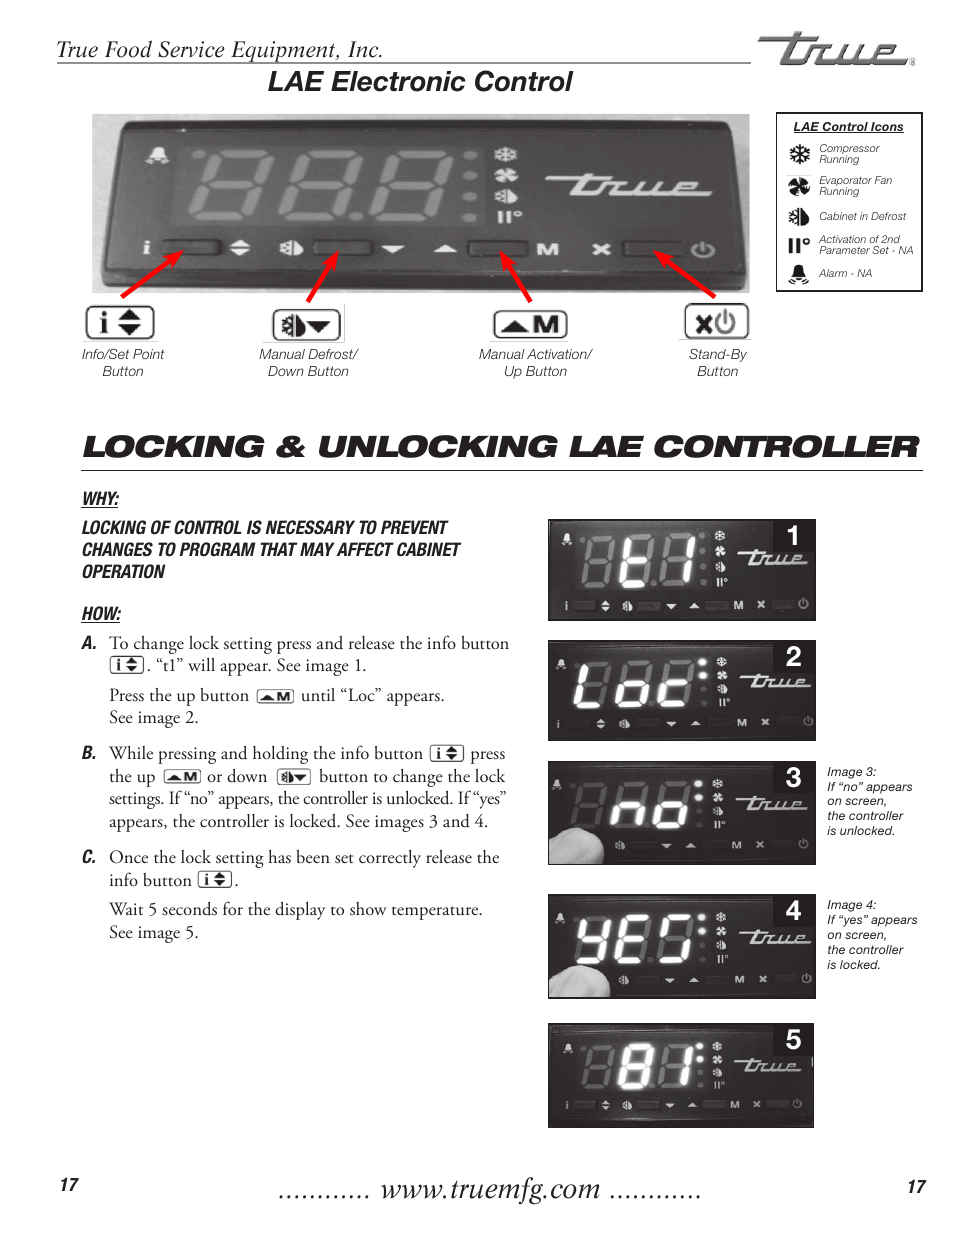 Locking & unlocking lae controller, 12 5 lae electronic control, True food  service equipment, inc | True Manufacturing Company TAC-36 User Manual |  Page 19 / 33